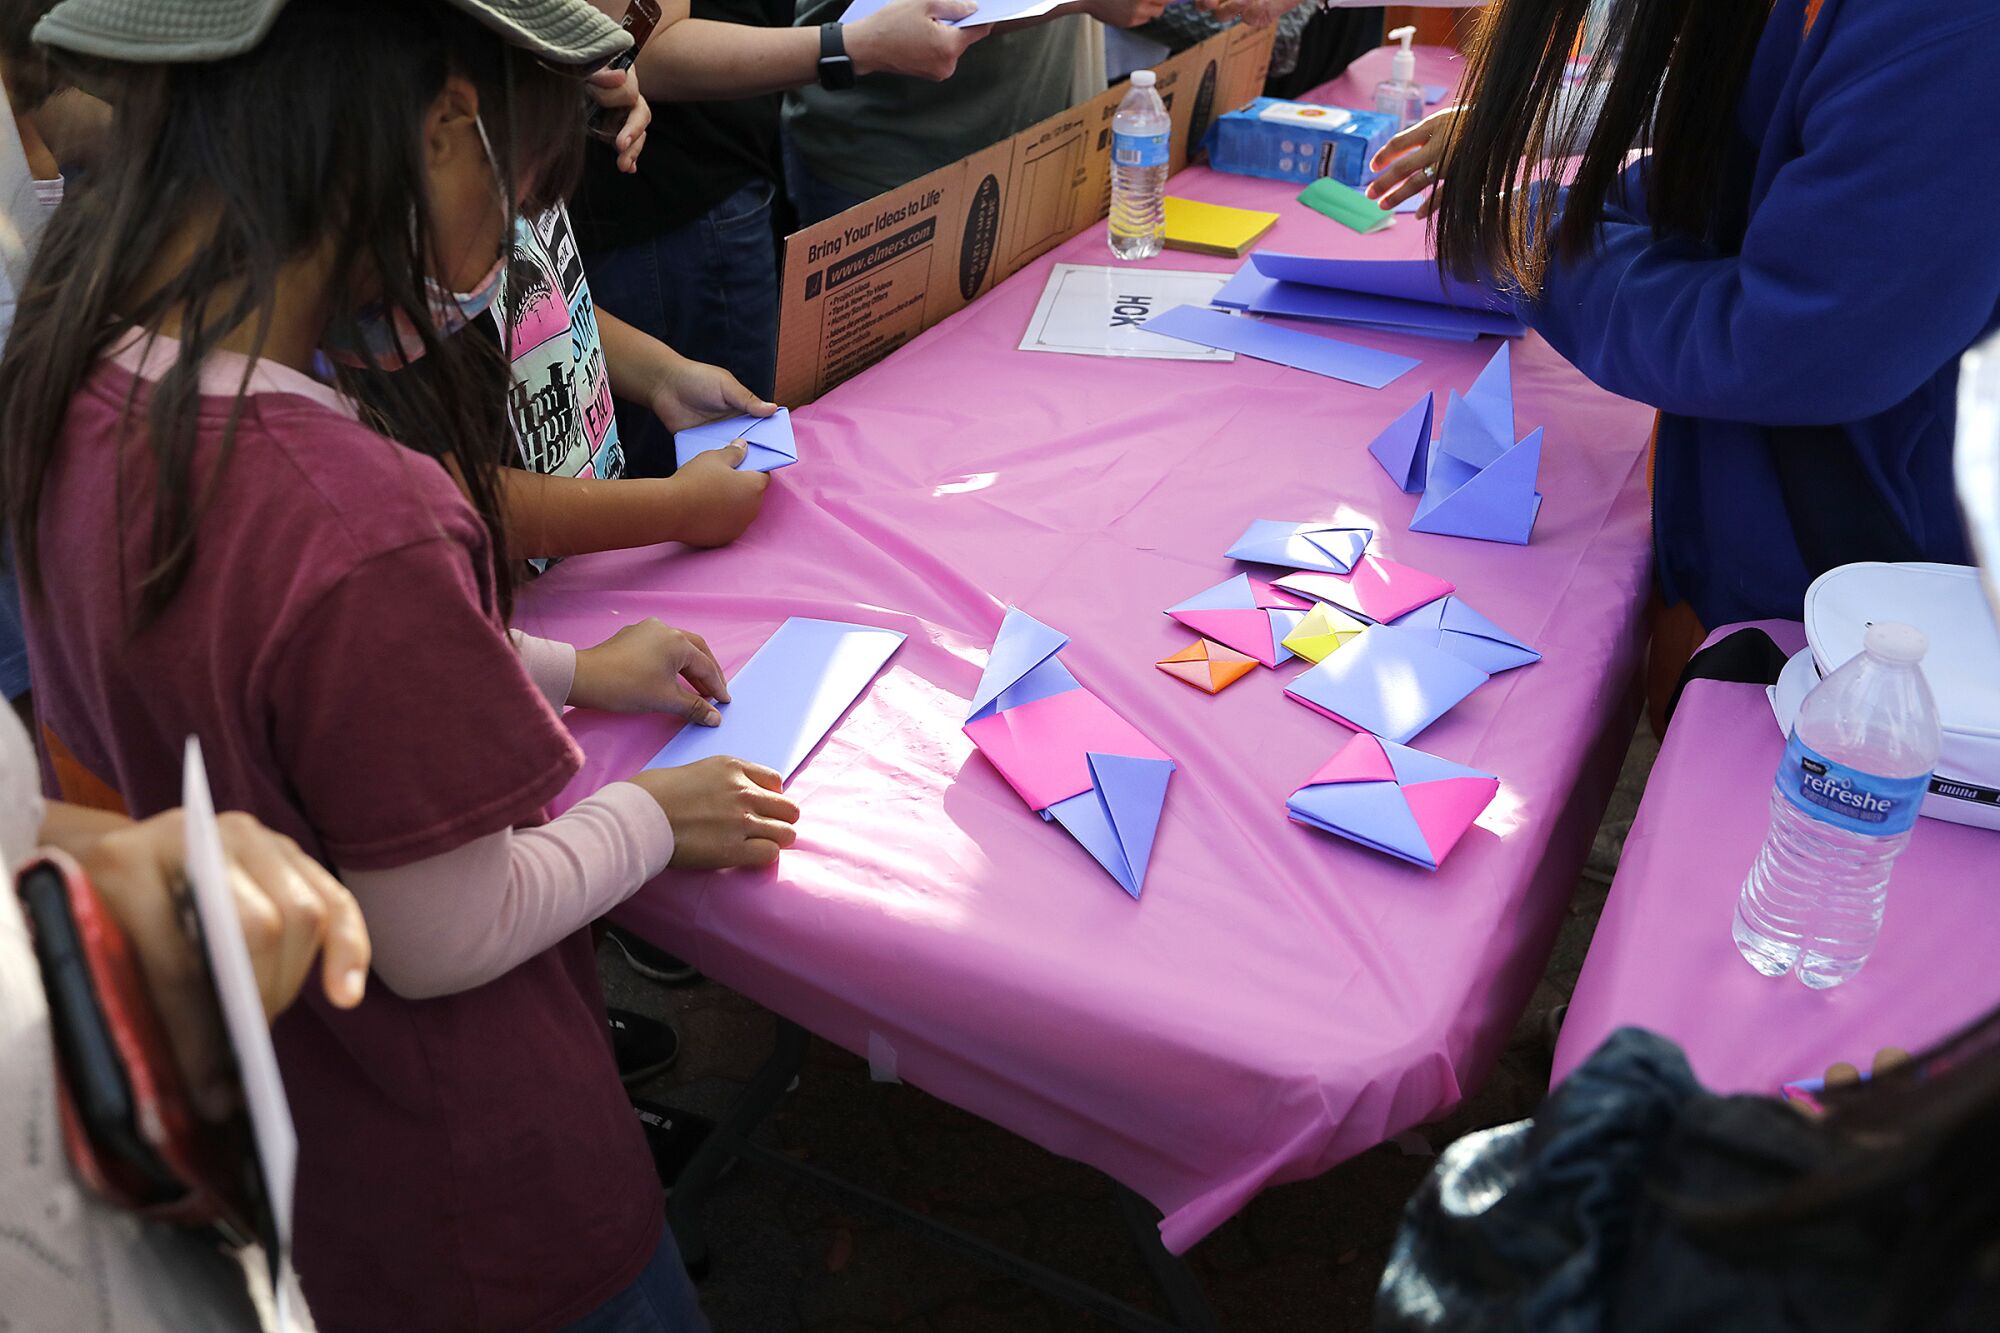 A booth at Korea Day showed the public how to create Ddakji, a traditional game.